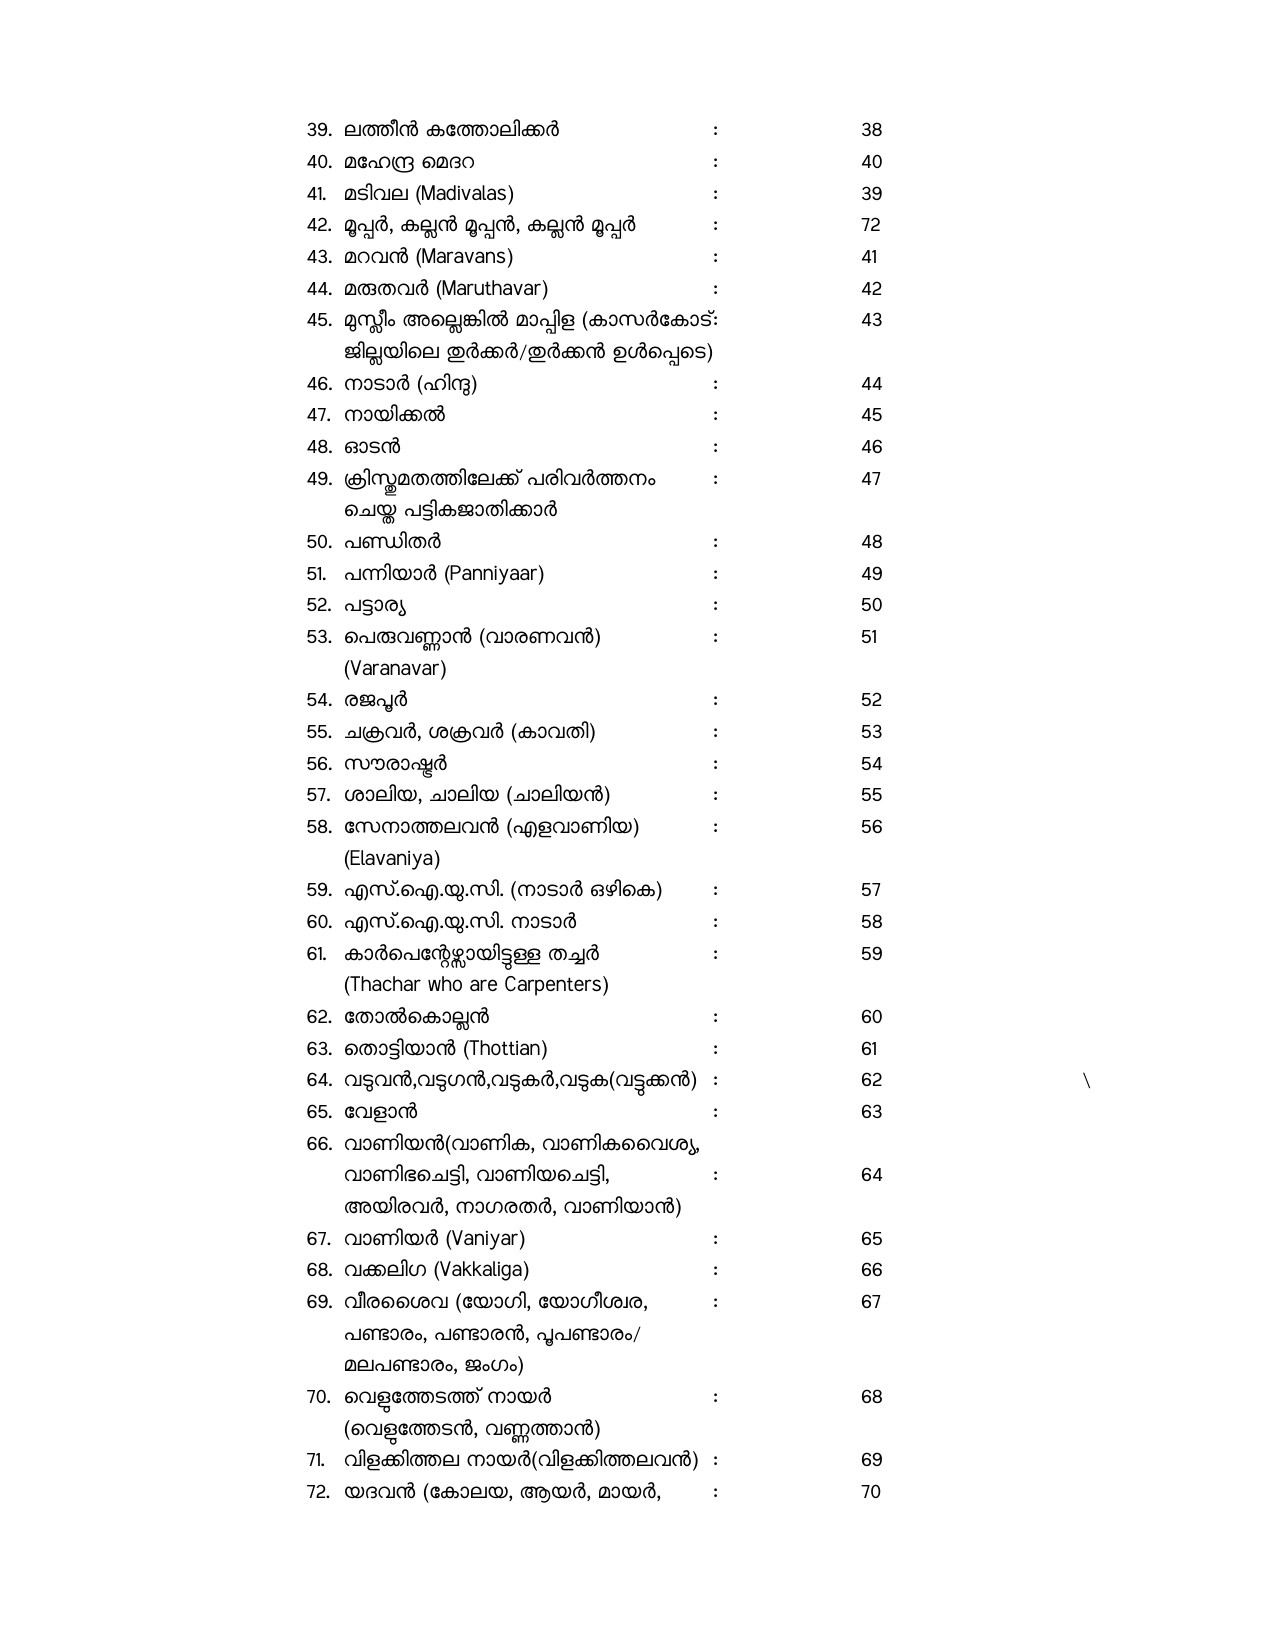 General Conditions and Certificate Formats in Malayalam - Notification Image 32